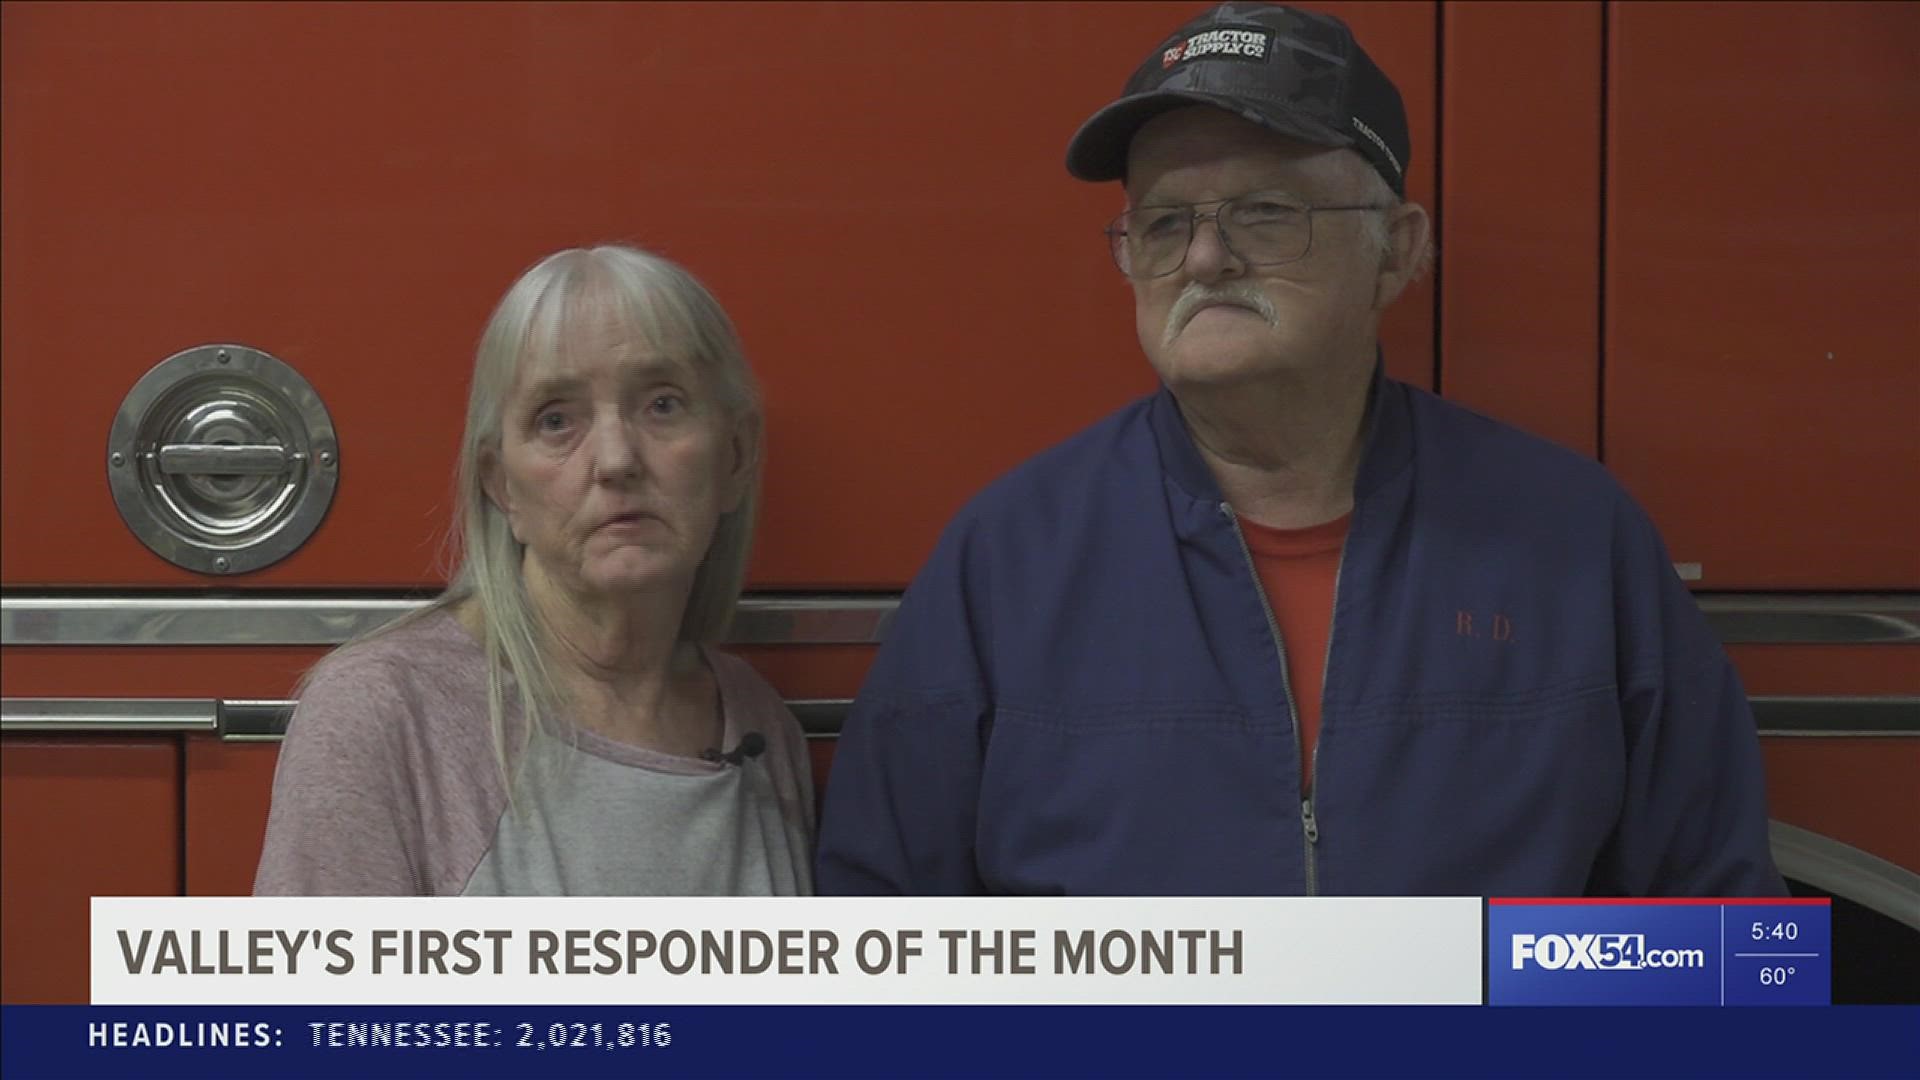 A couple's love for service goes deep.. They've been serving for the Bobo Volunteer Fire Department for 42 years and counting!